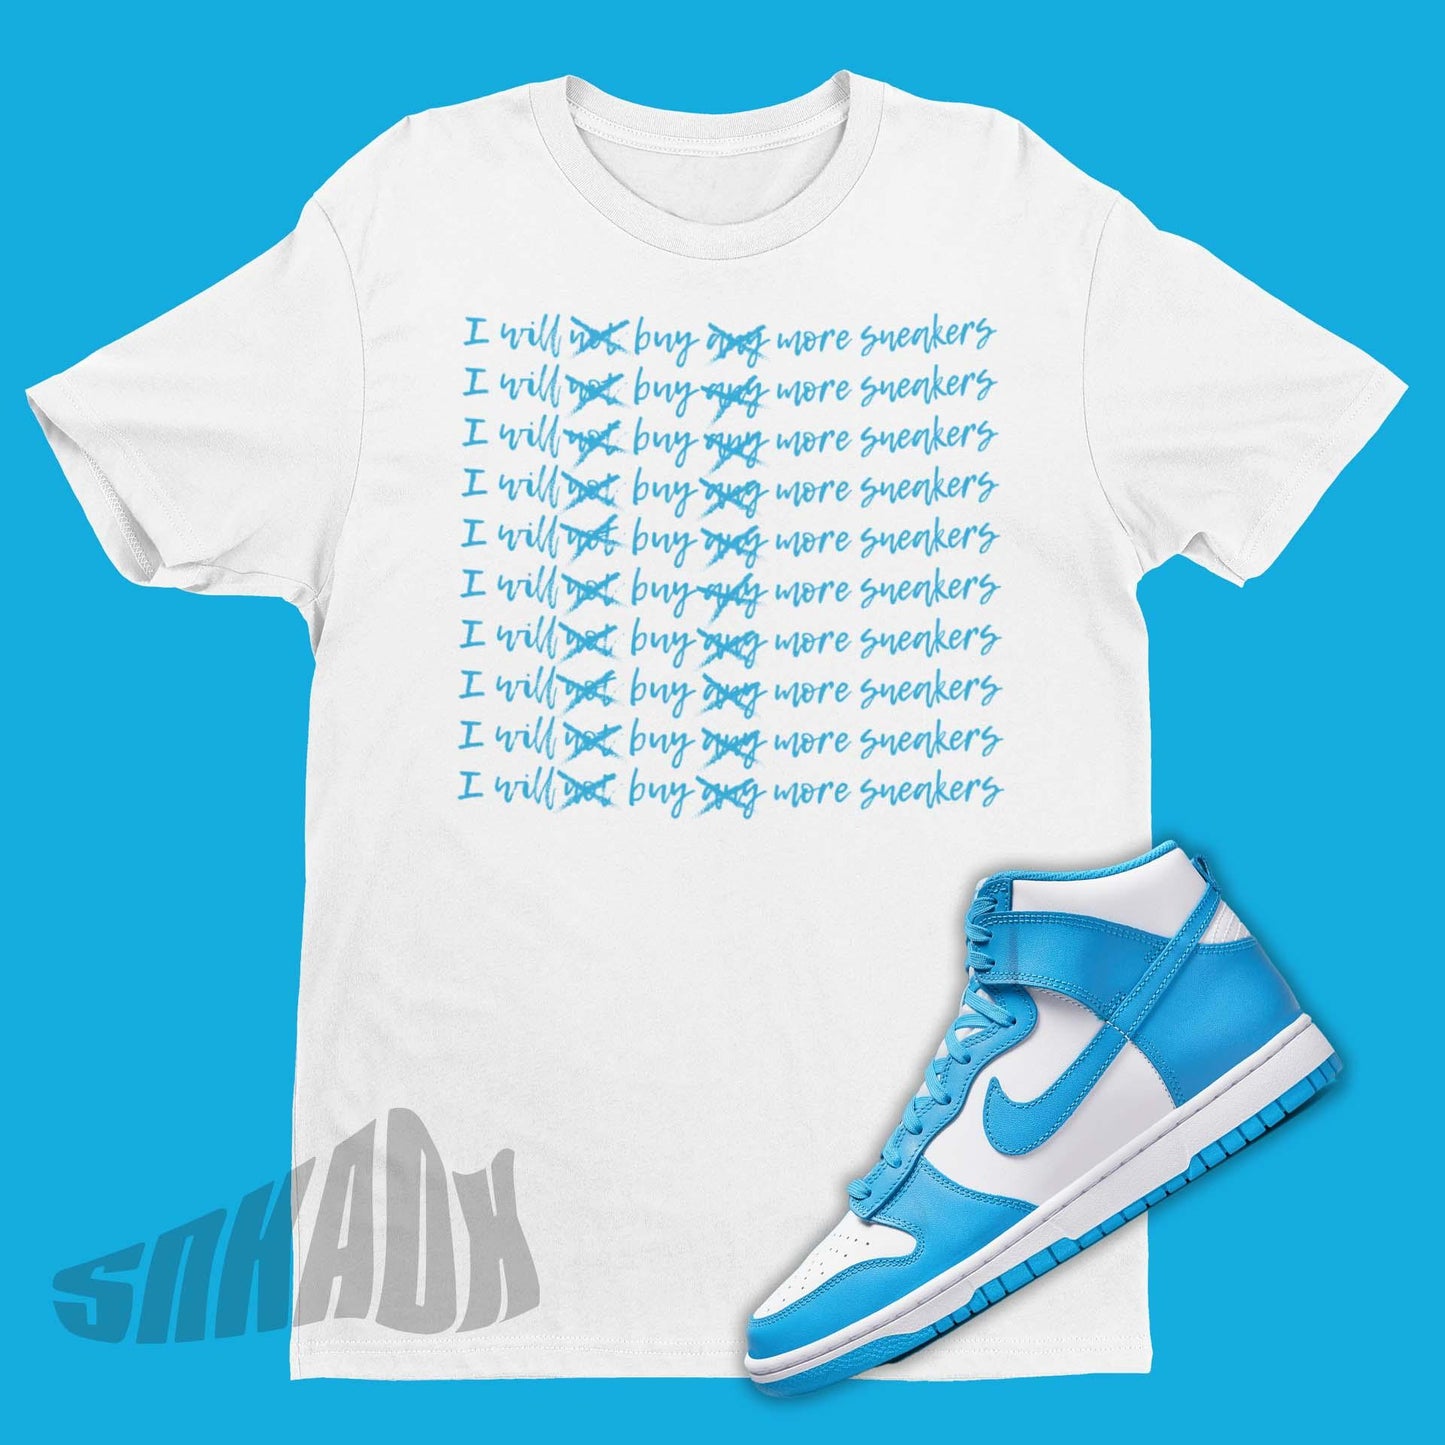 Buy More Sneakers Shirt To Match Nike Dunk High Laser Blue